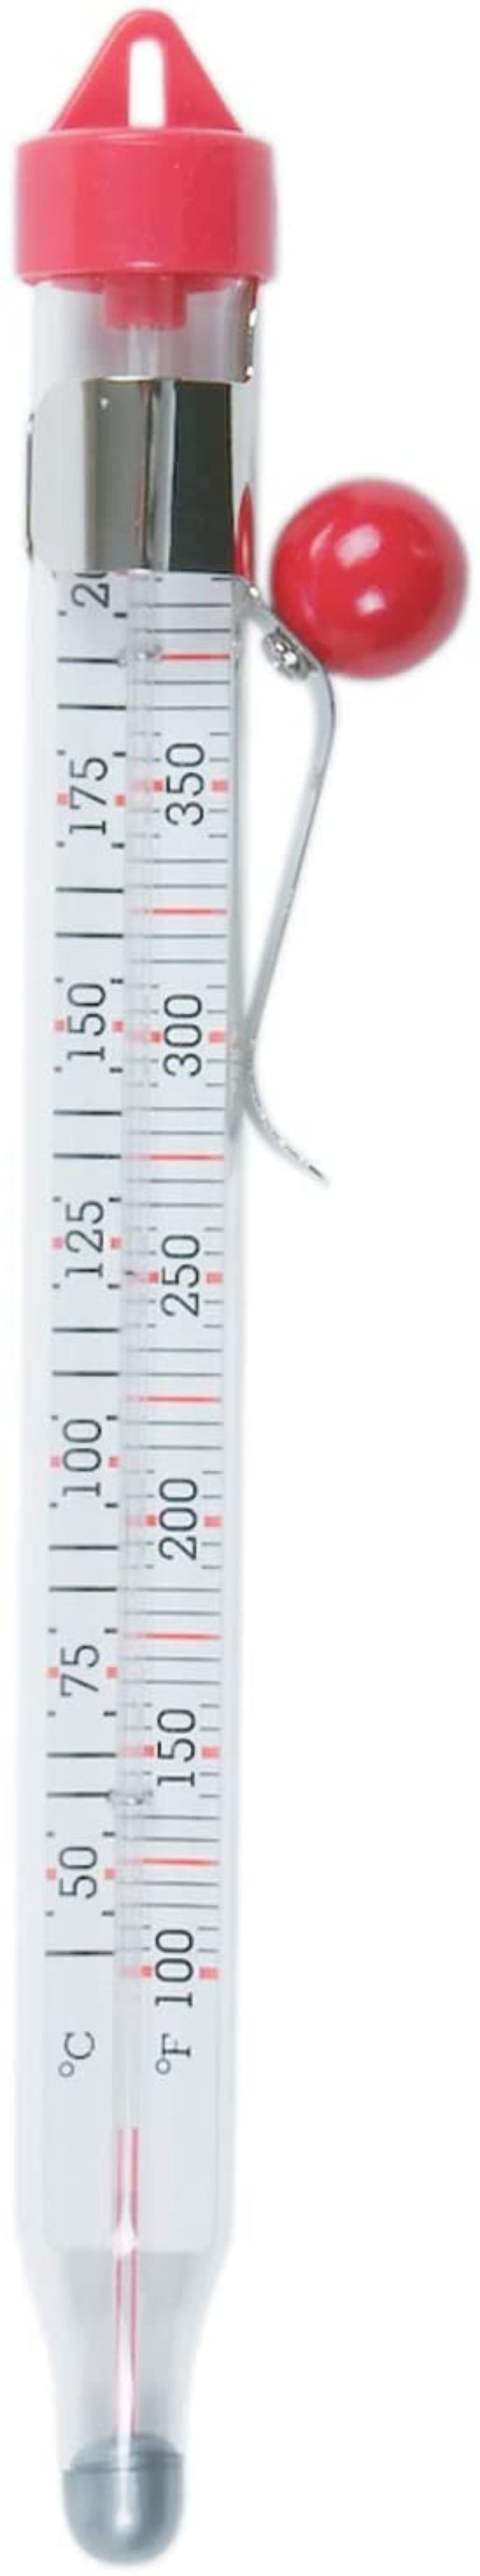 2x11-3/4-Inch 2 X Winco Deep Fry/Candy Thermometer with Hanging Ring